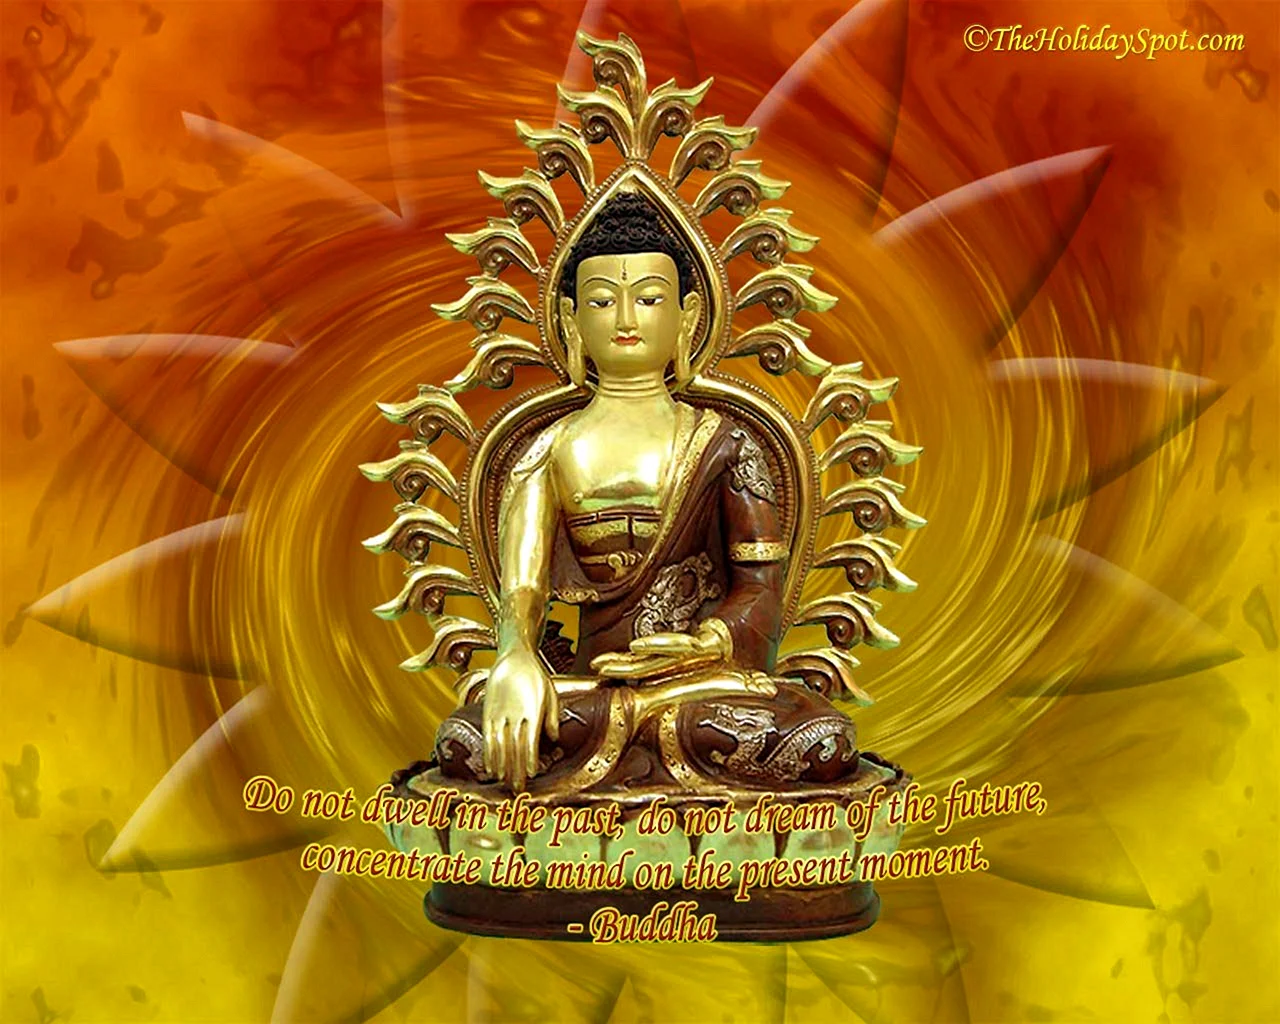 Lord Buddha standing images Wallpaper